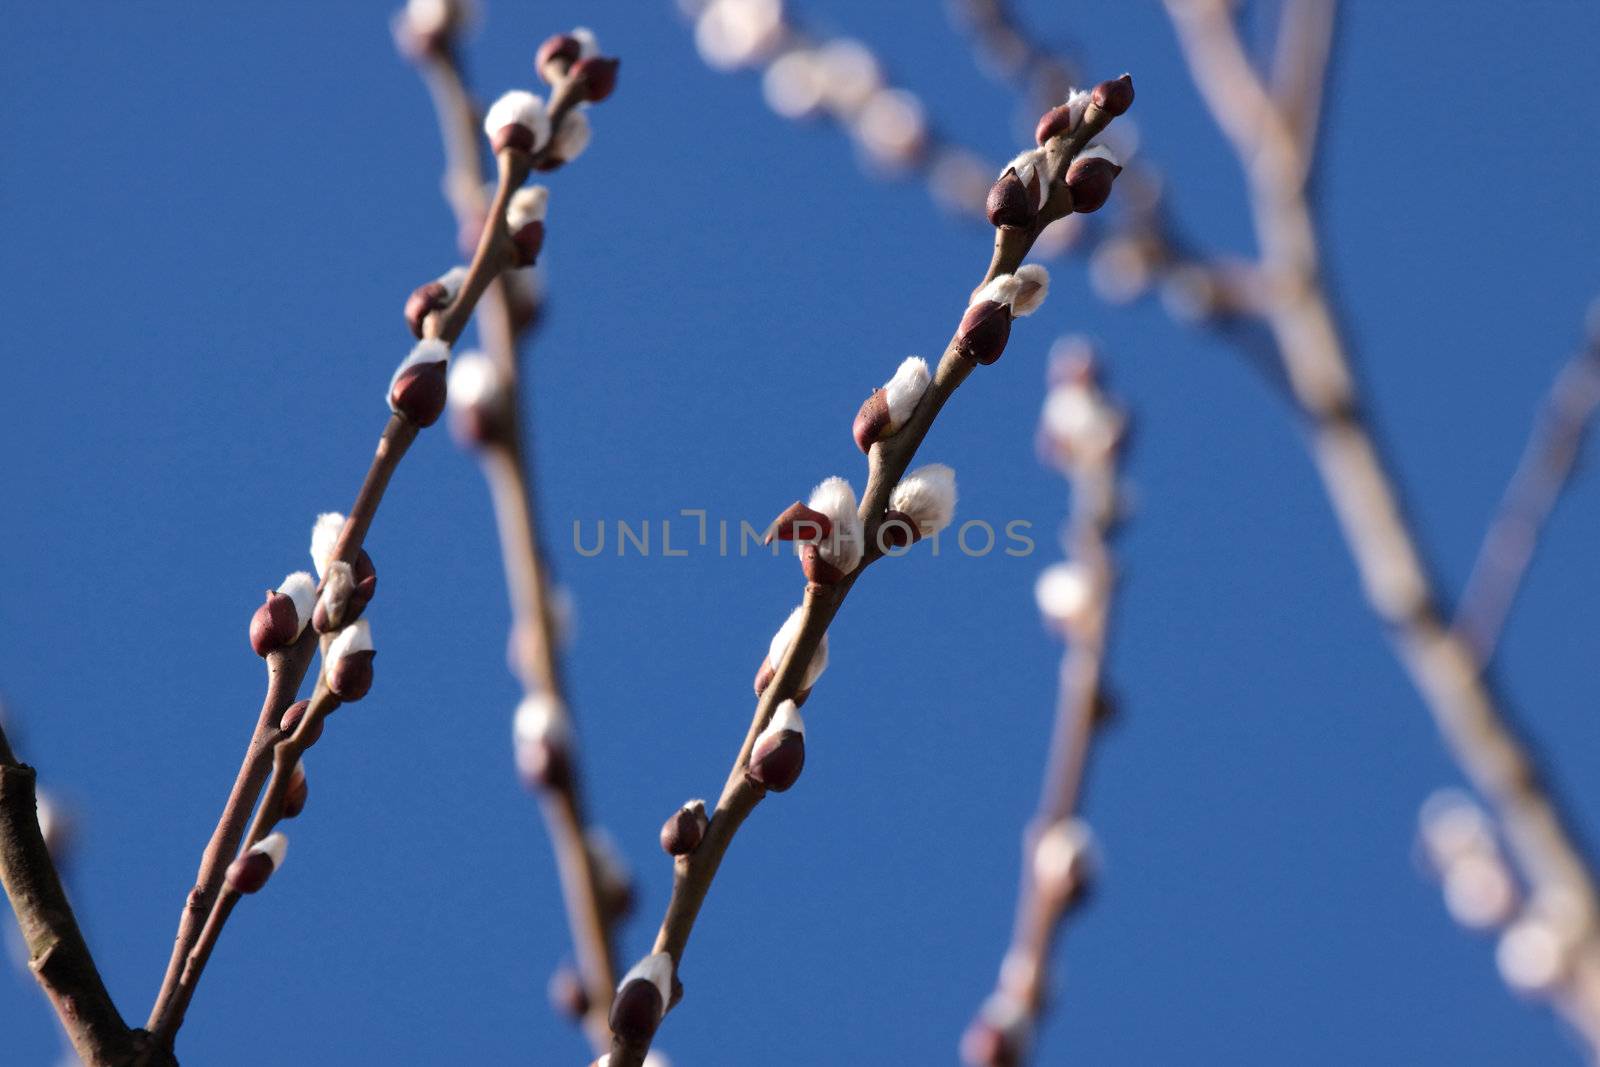 Twigs of willow with catkins on a clear sky background - easter symbol